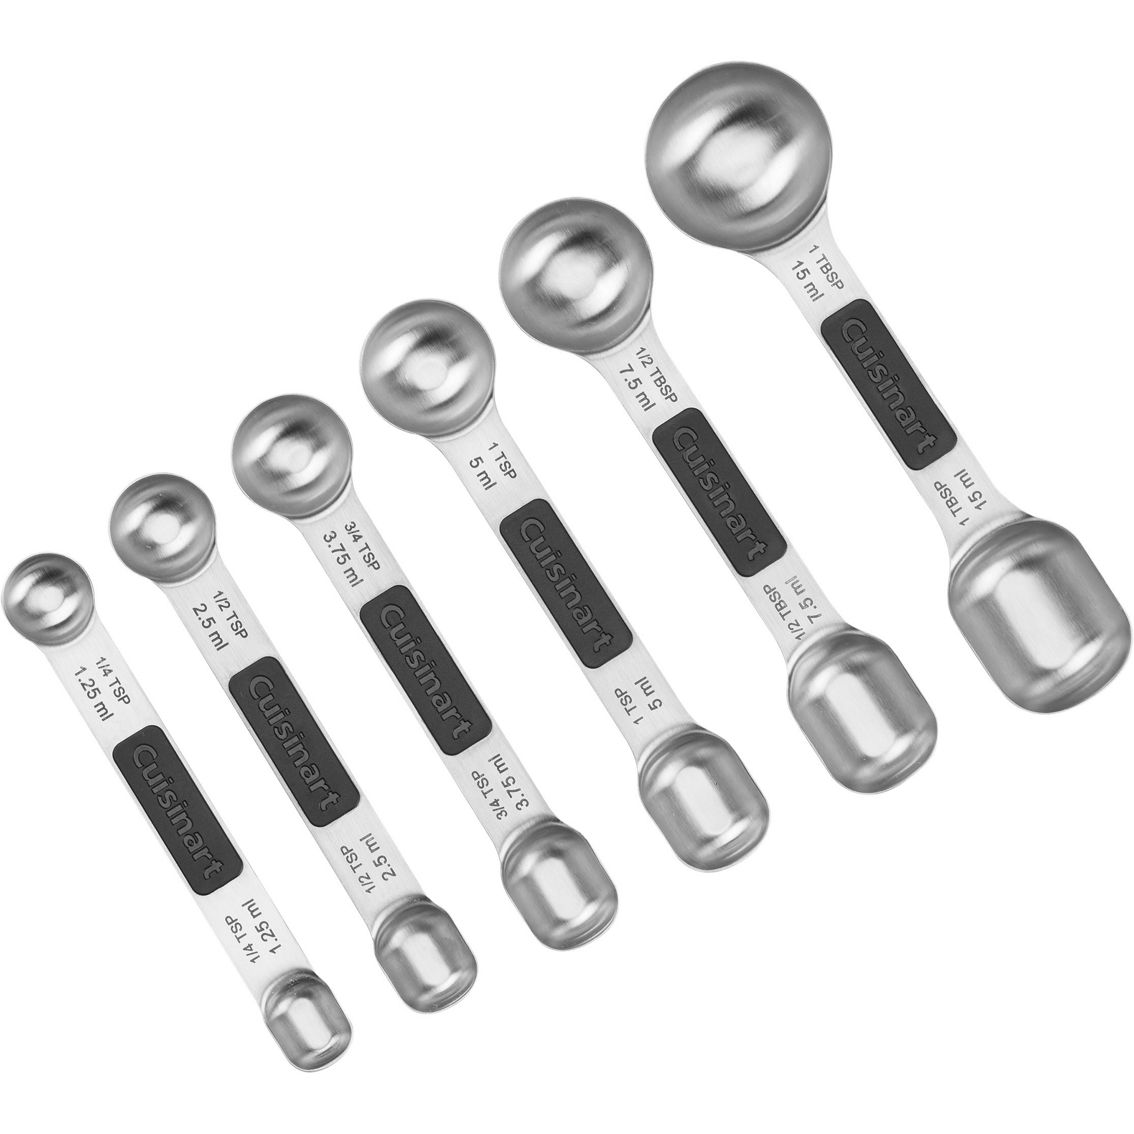 Cuisinart Set of 6 Magnetic Measuring Spoons - Image 2 of 2